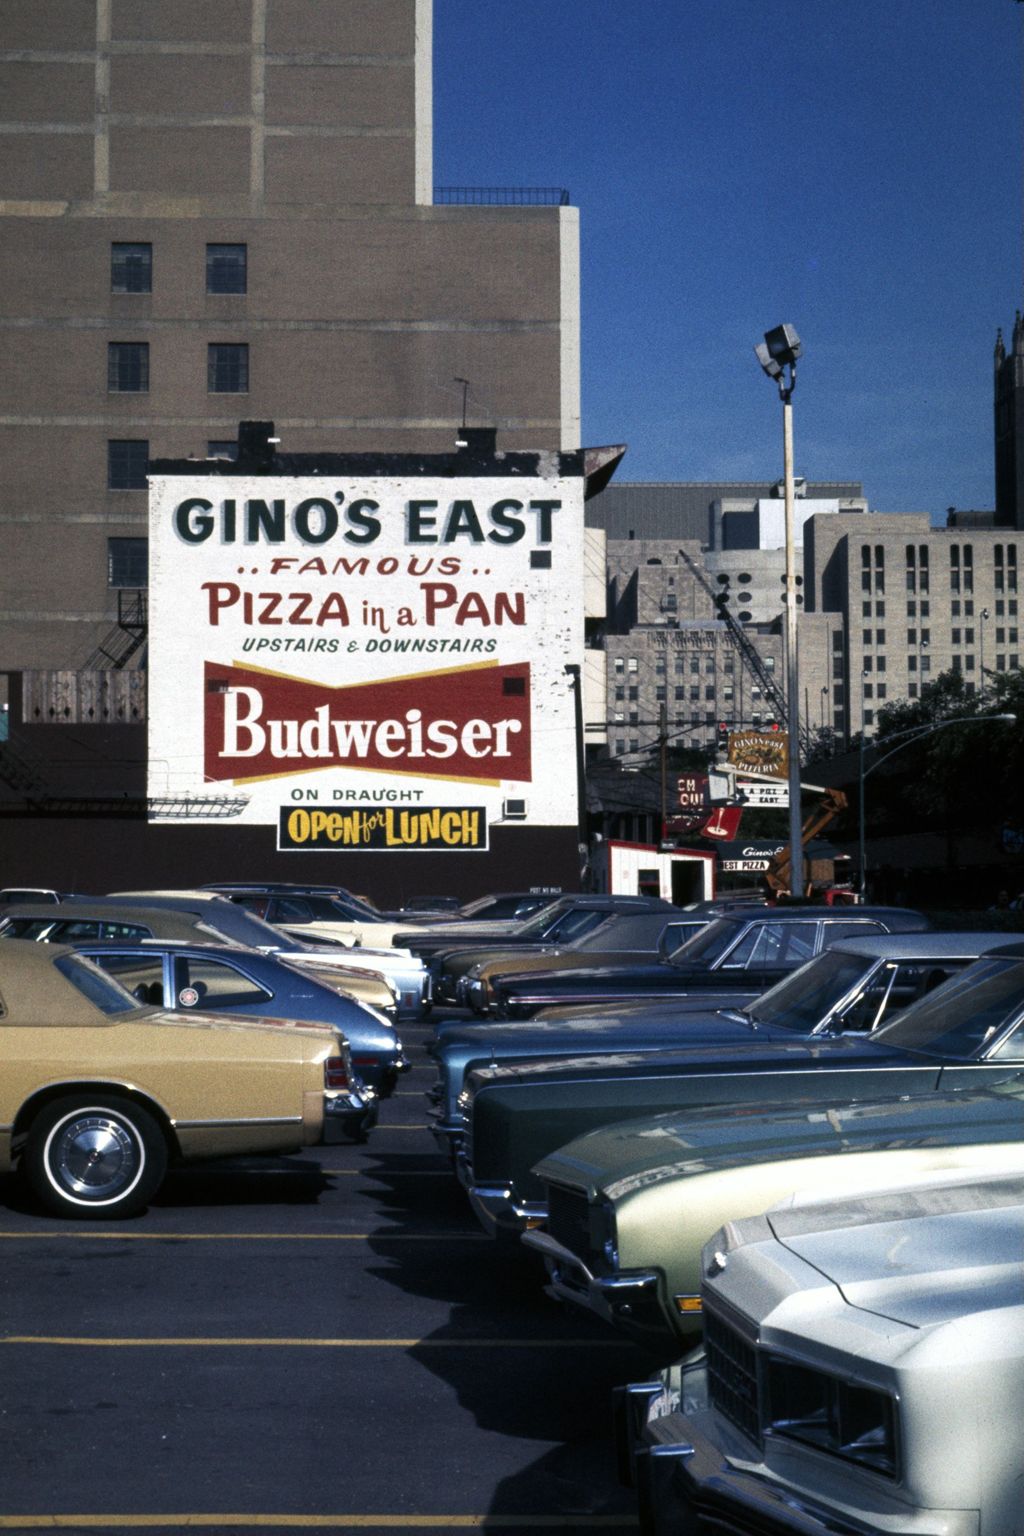 Gino's East pizzeria sign and parking lot